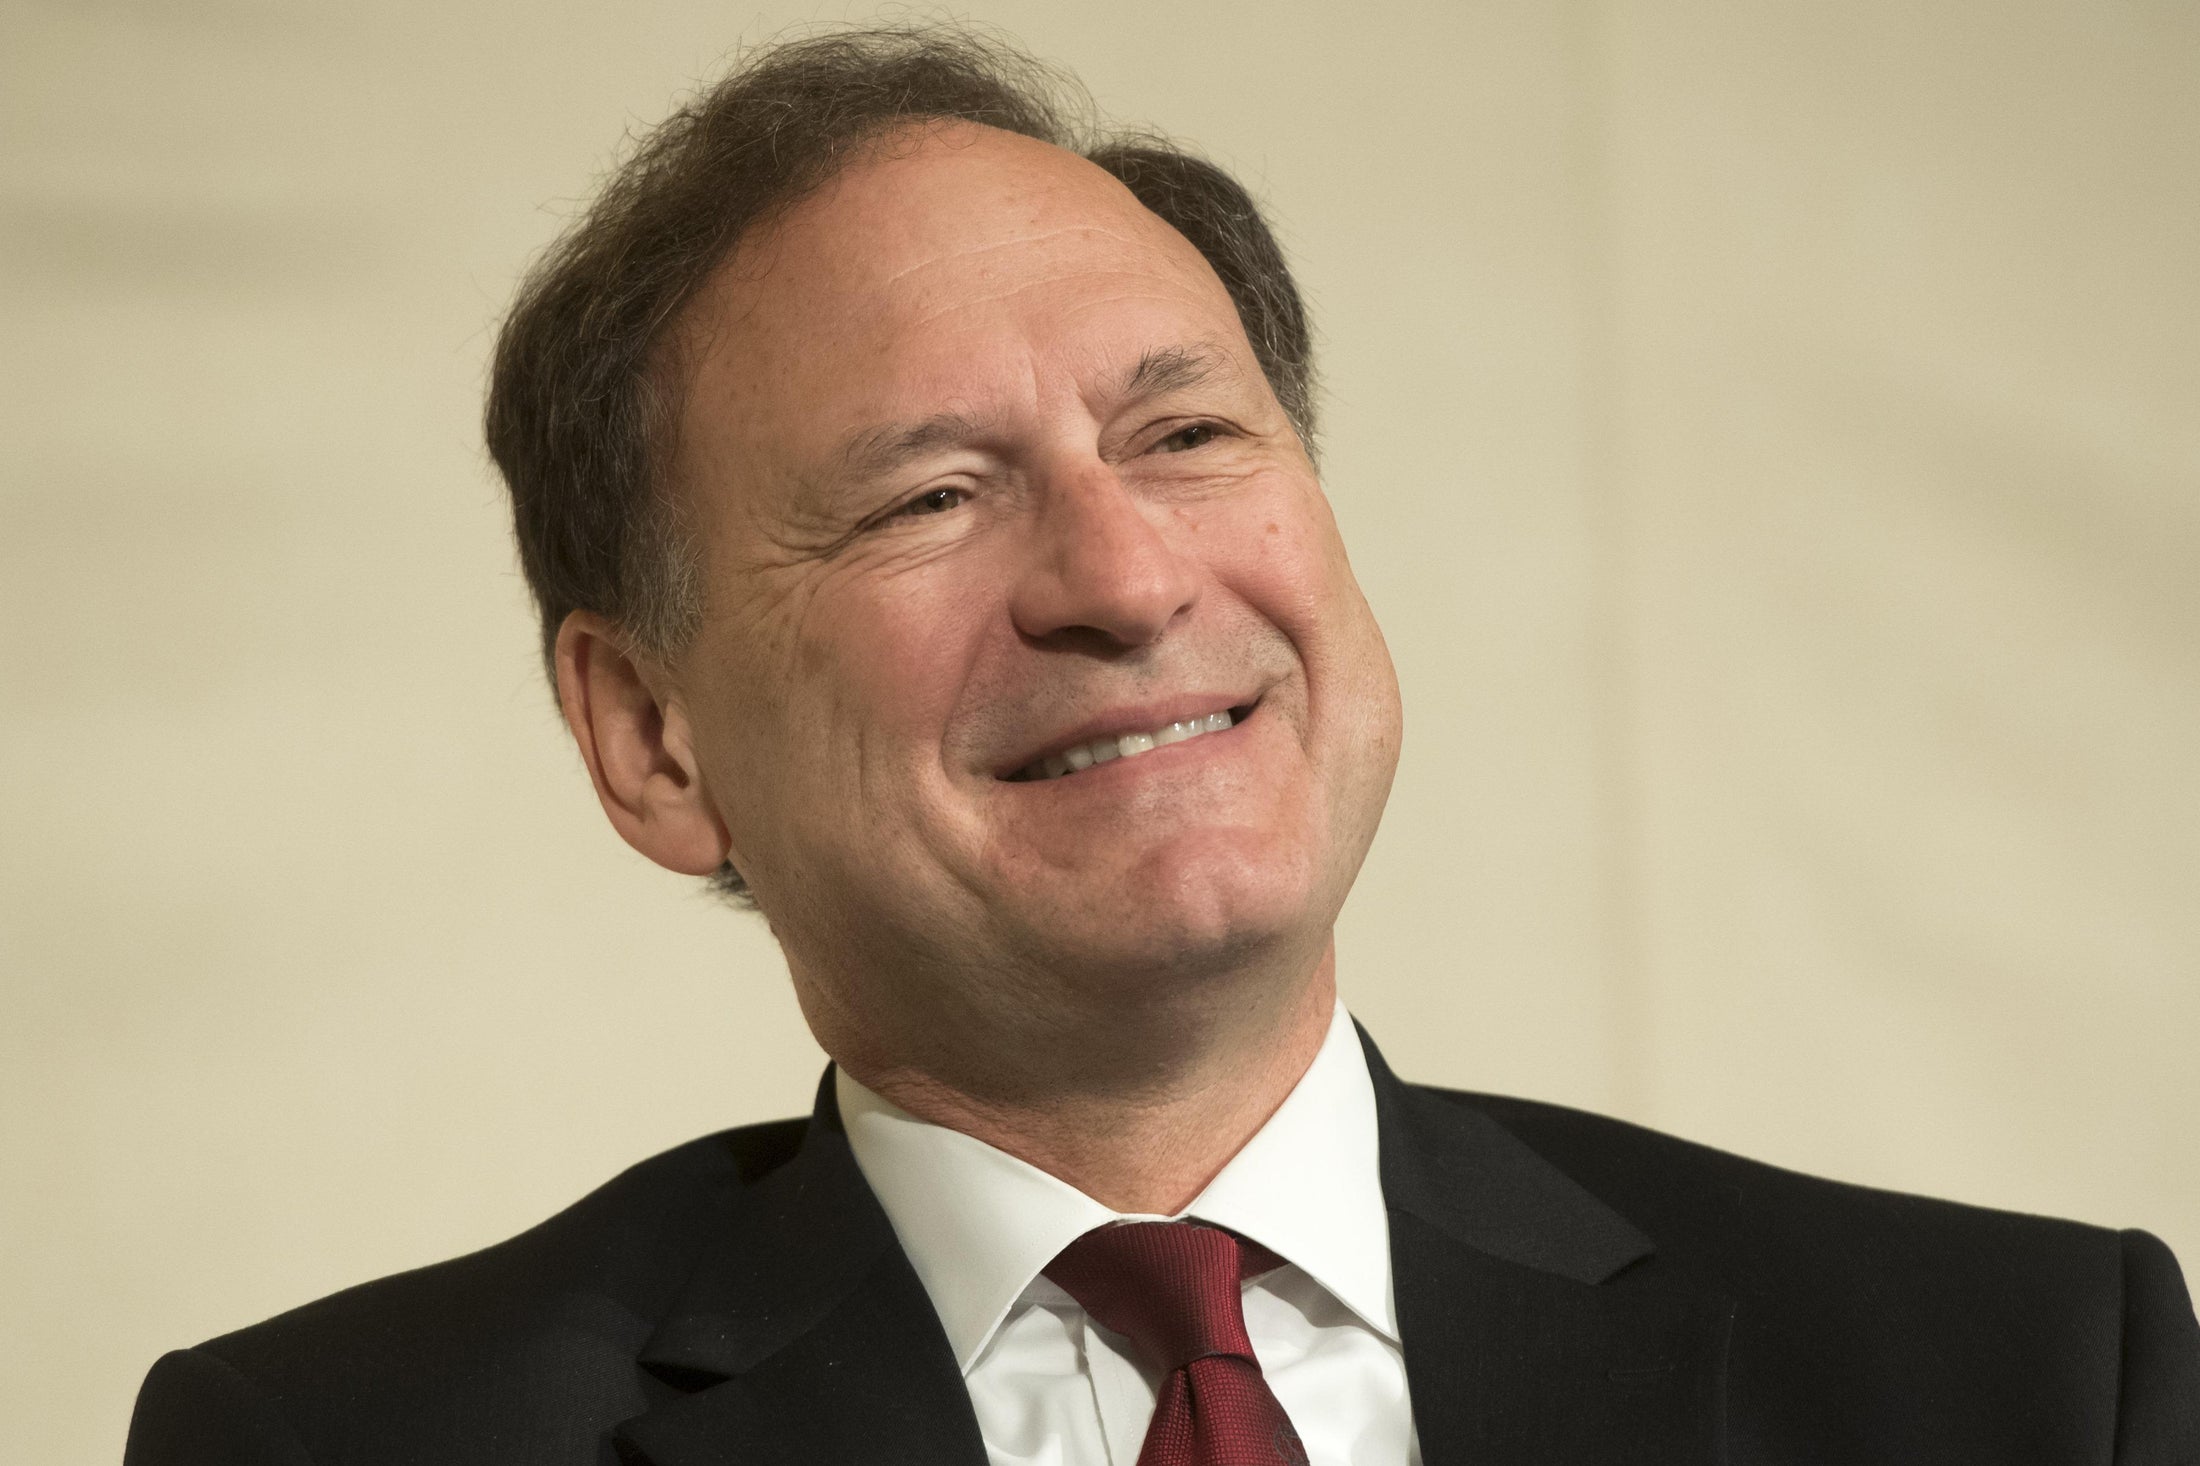 Justice Alito prepares an attack on state sovereignty over voting rights.